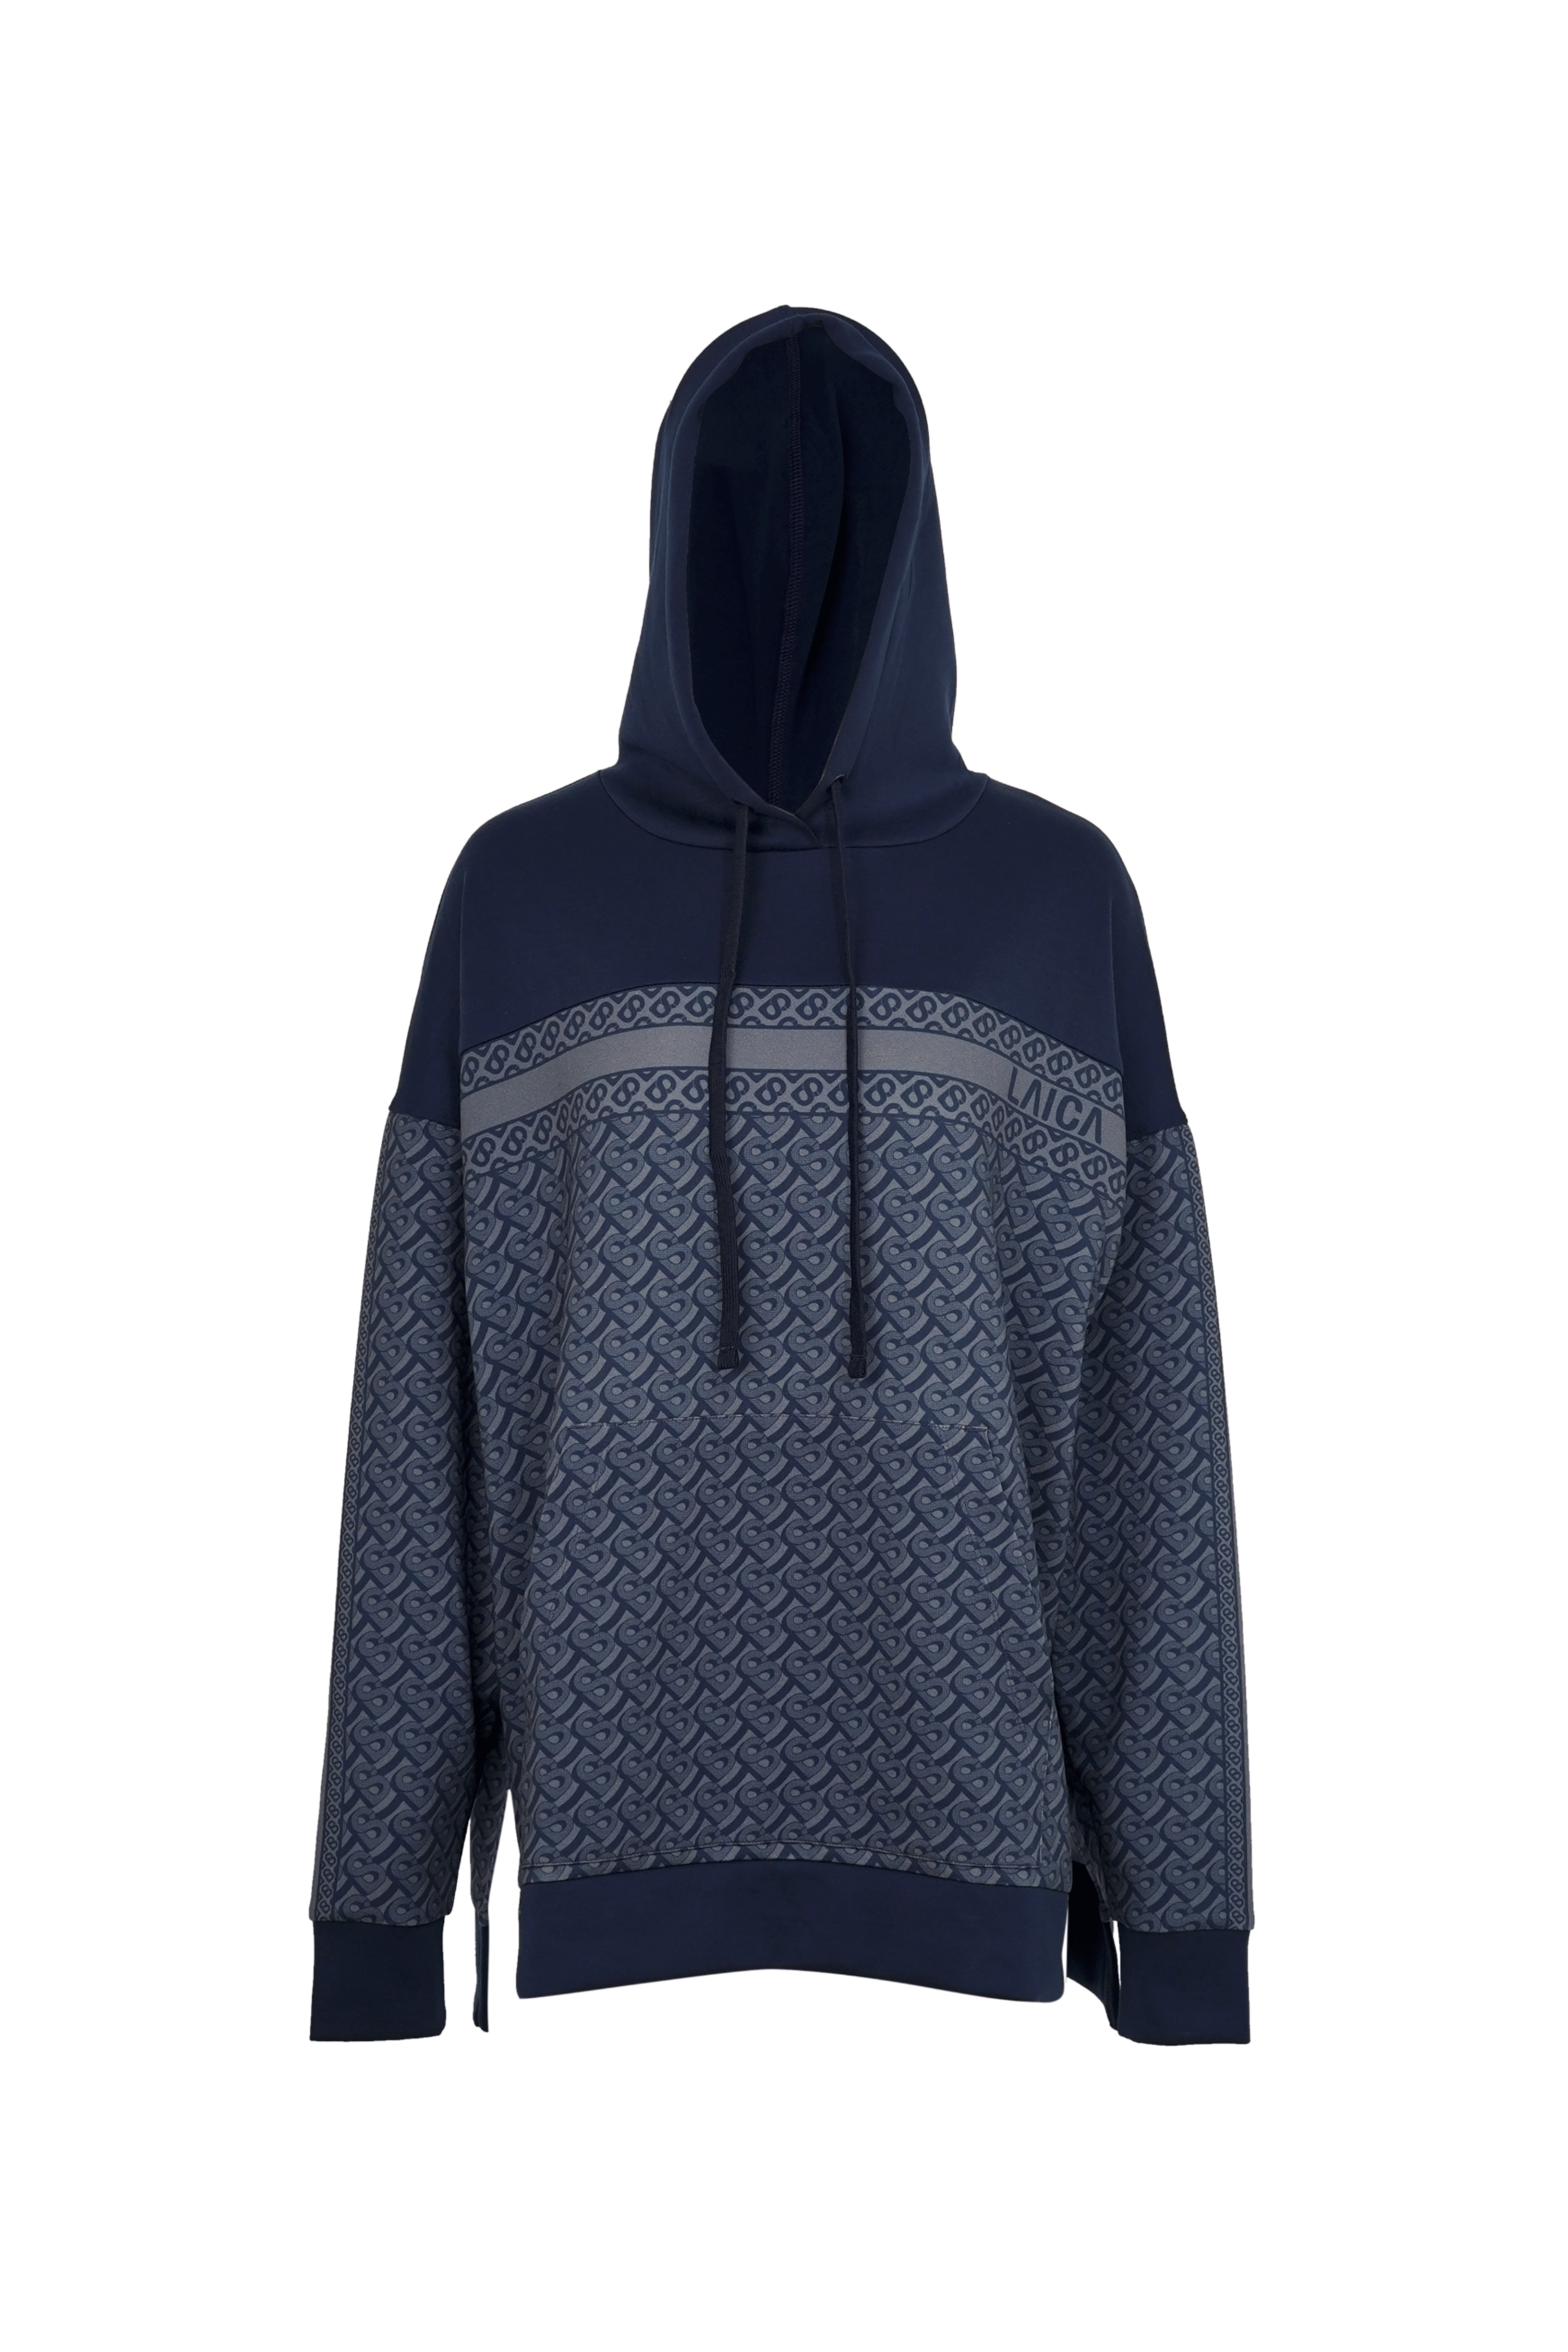 LAICA x Buttonscarves Athleisure Hoodie - Navy